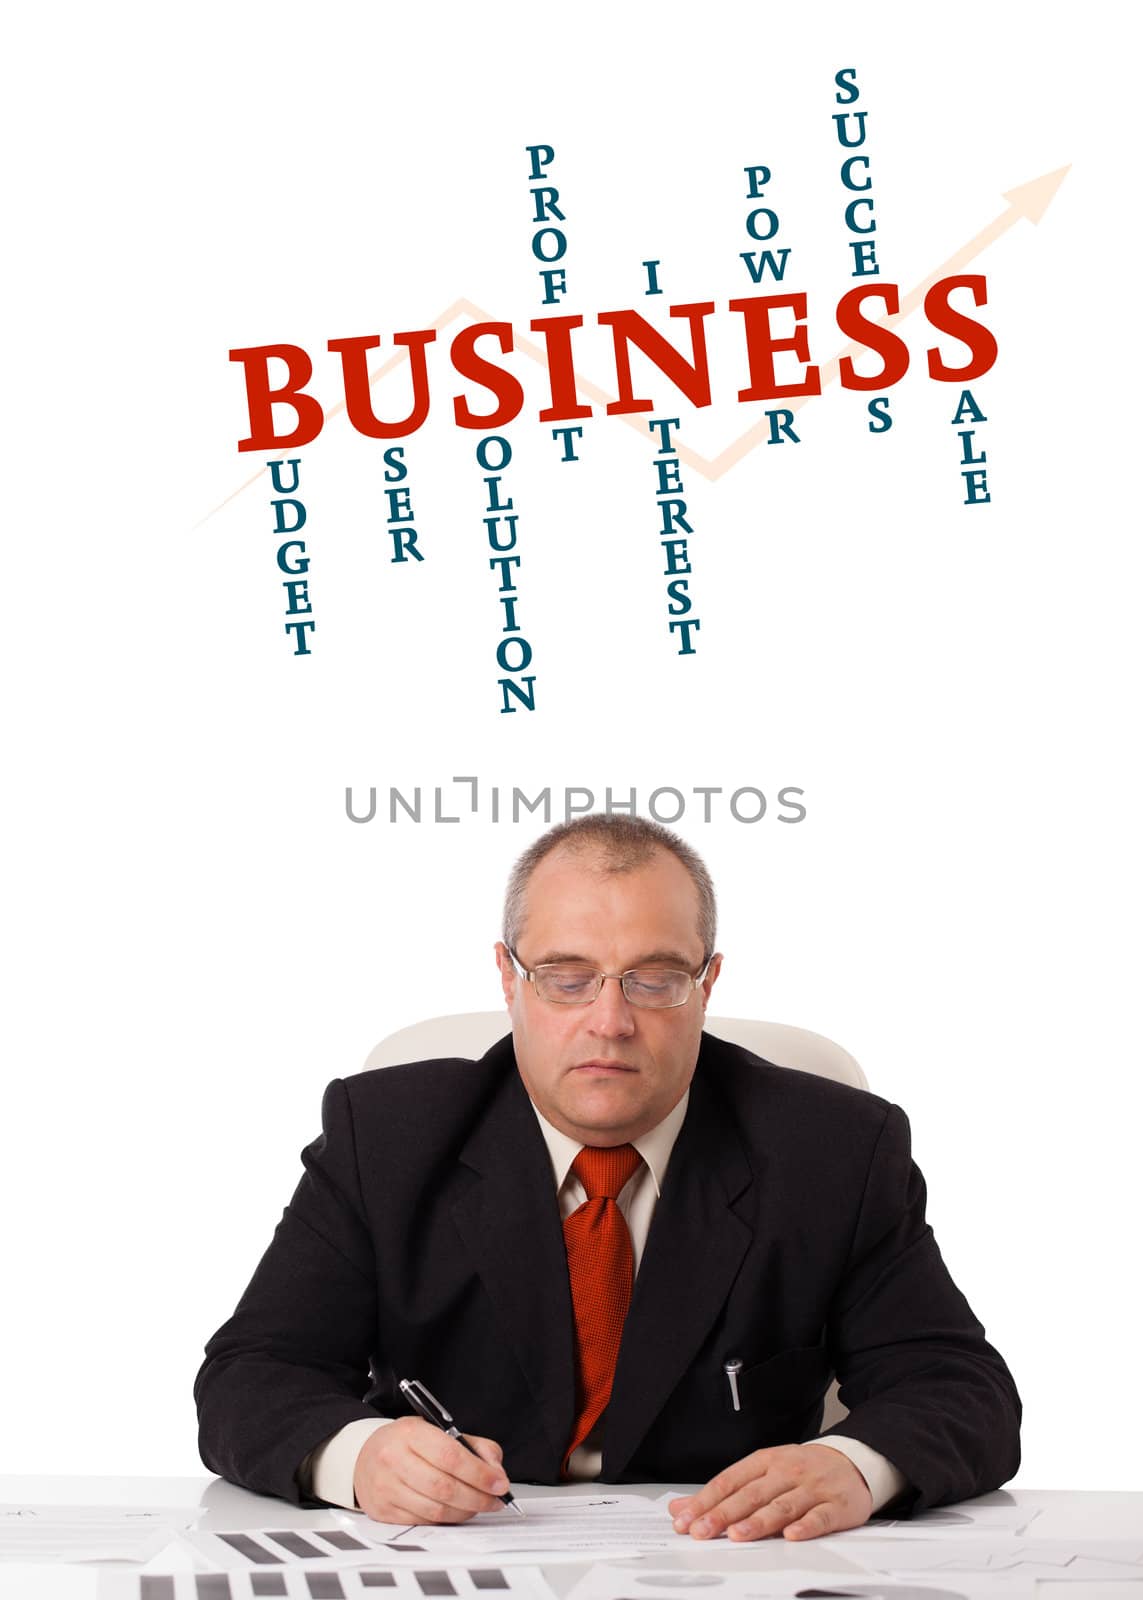 businessman sitting at desk with word cloud, isolated on white